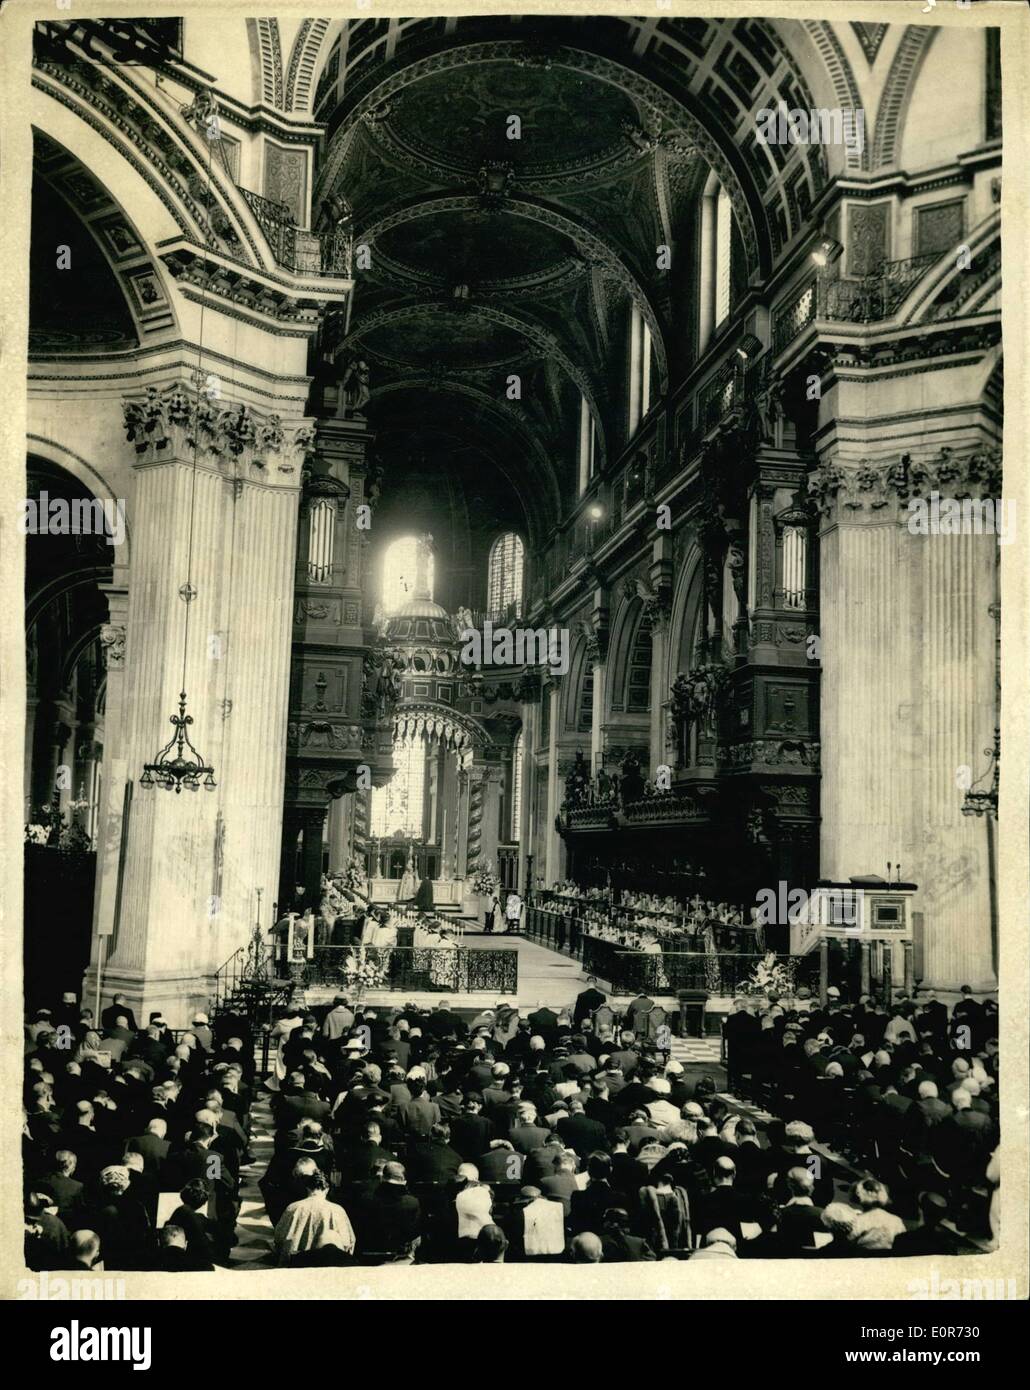 Jun. 06, 1958 - Queen attends dedication at St. Paul's: H.M. the Queen and the Duke of Edinburgh today attended a service for the re-dedication of the restored eastern part of St. Paul's Cathedral and the dedication of the new High Altar as a memorial to the 335.451 men and women of the Commonwealth overseas who died in the two world wars. Photo shows the Archbishop of Canterbury during the Consecration showing the Queen and the Duke of Edinburgh seated at St. Paul's Cathedral today. Stock Photo